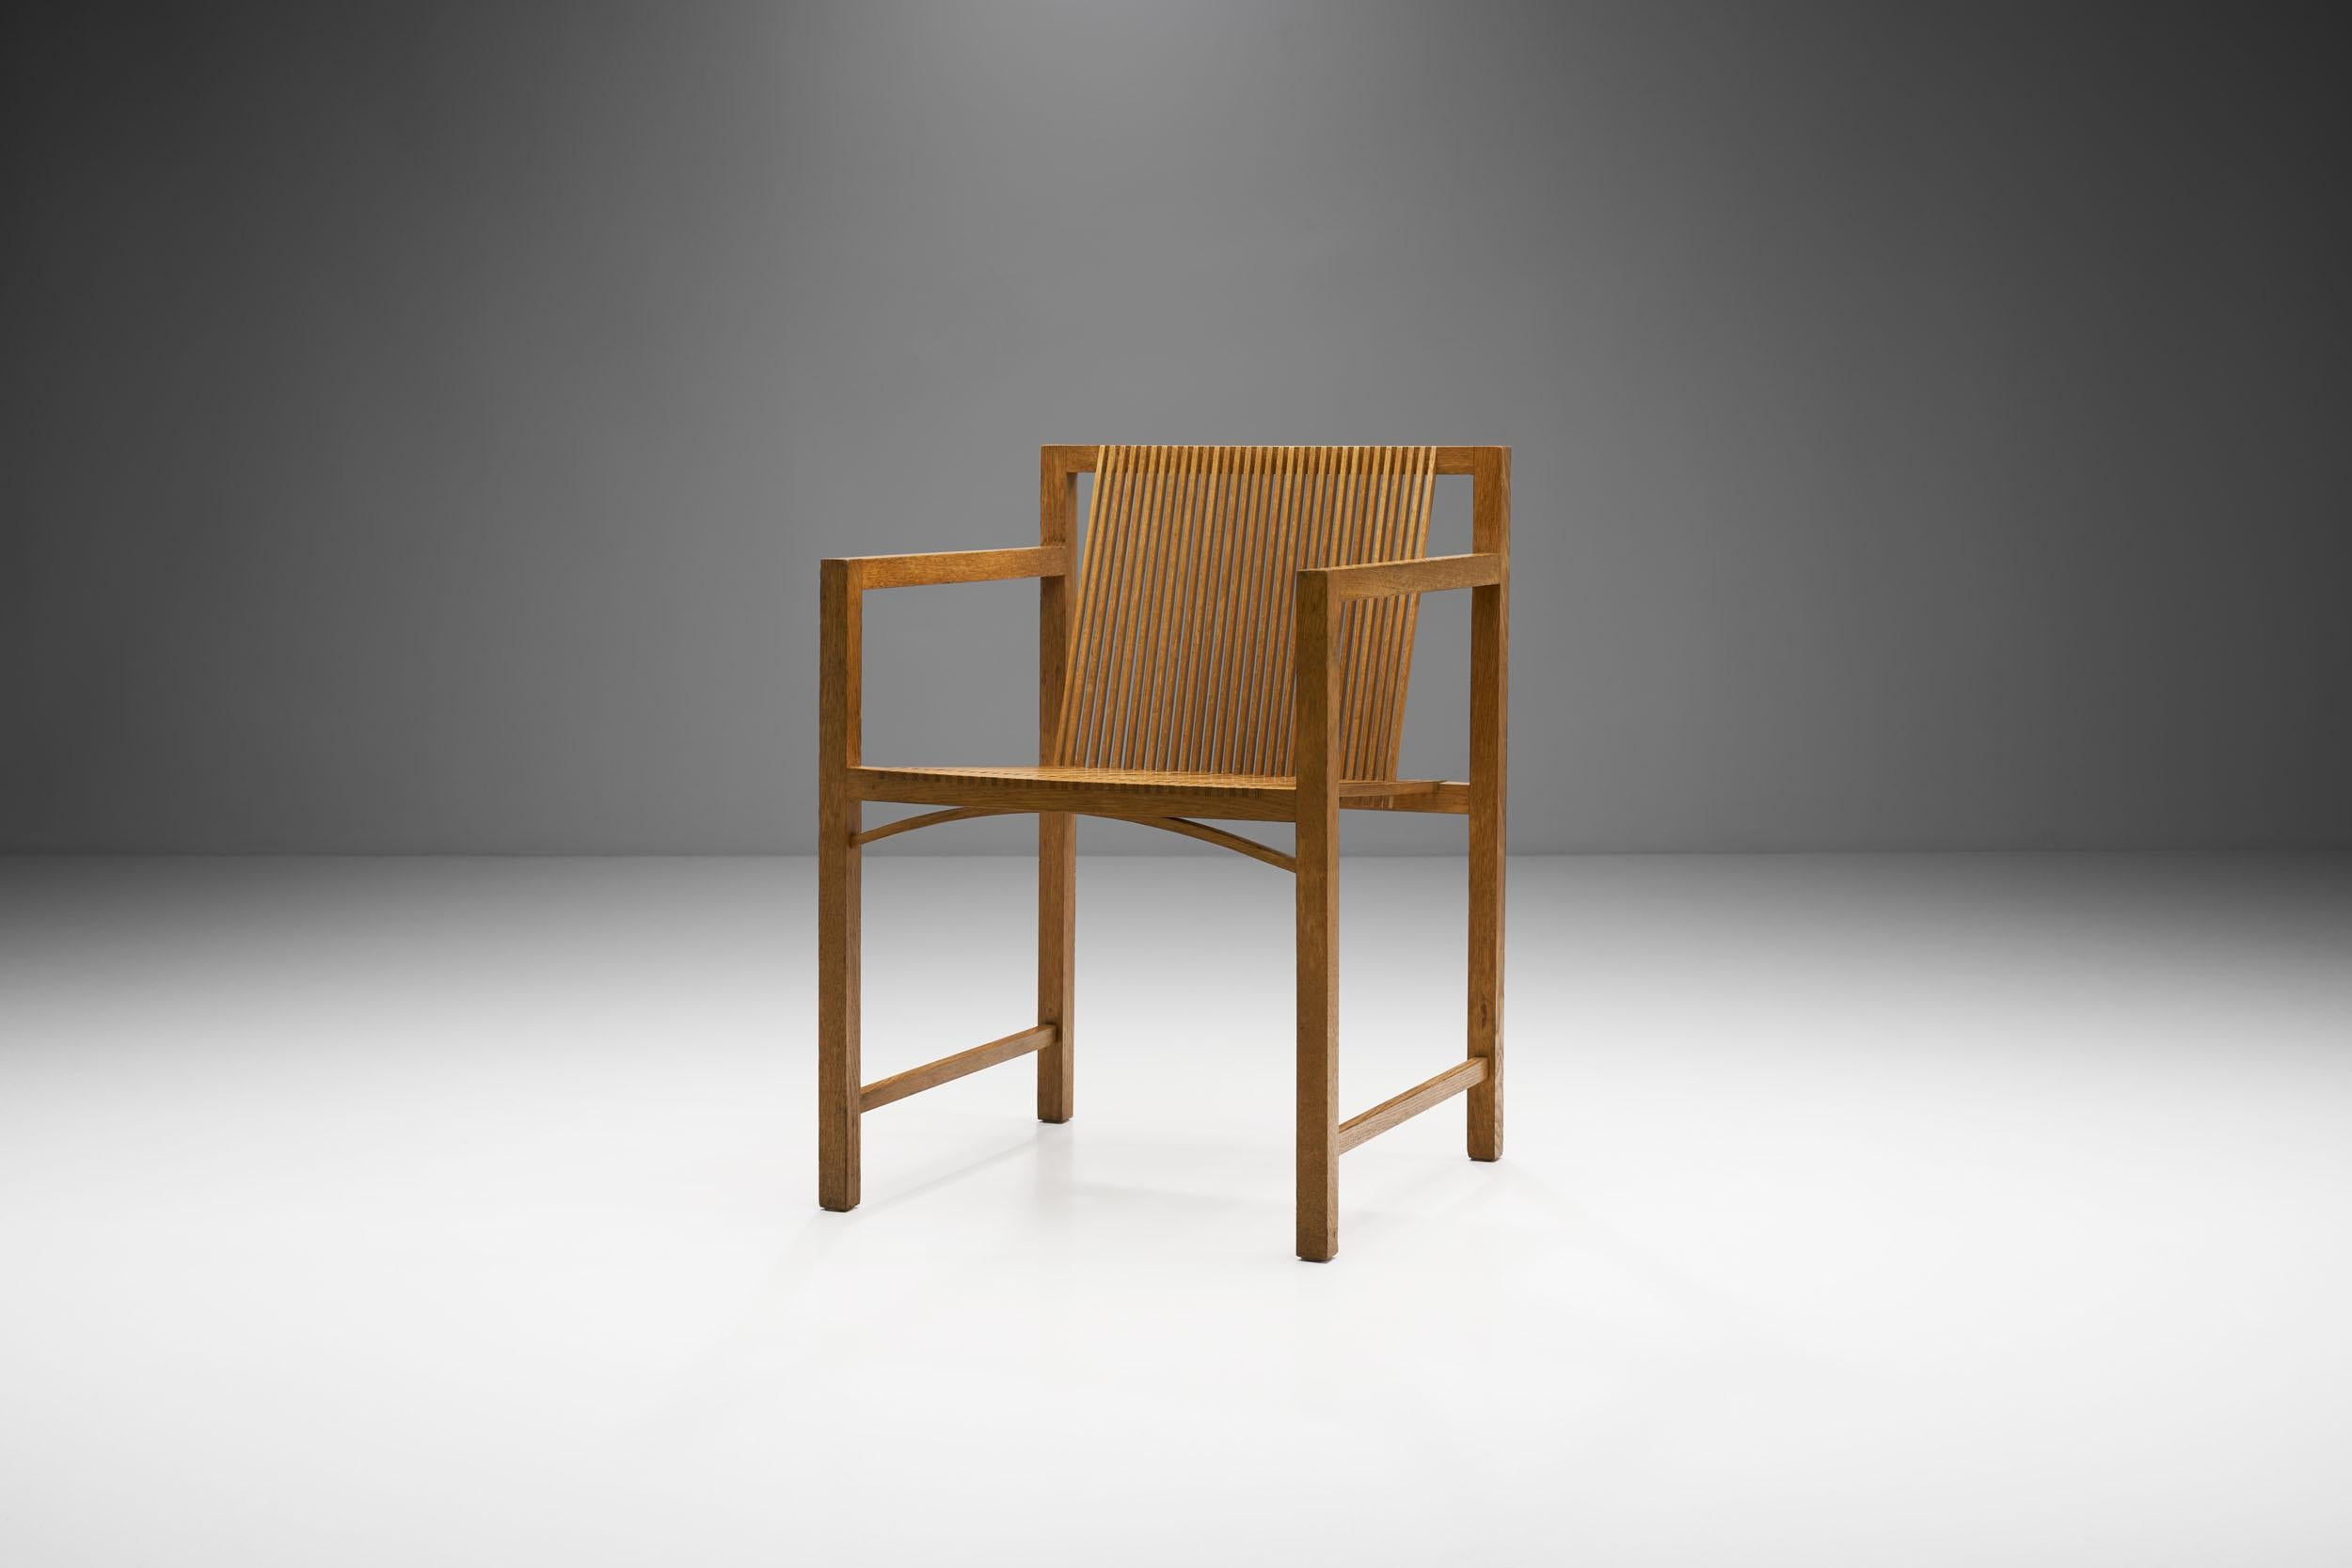 Designed by Ruud-Jan Kokke, this slat chair was produced by the Dutch manufactory Spectrum, in 1986 as part of their series called “Kokke-Chairs”.

The frame is manually assembled and it is made of oak, while the resilient slats are made of sprung